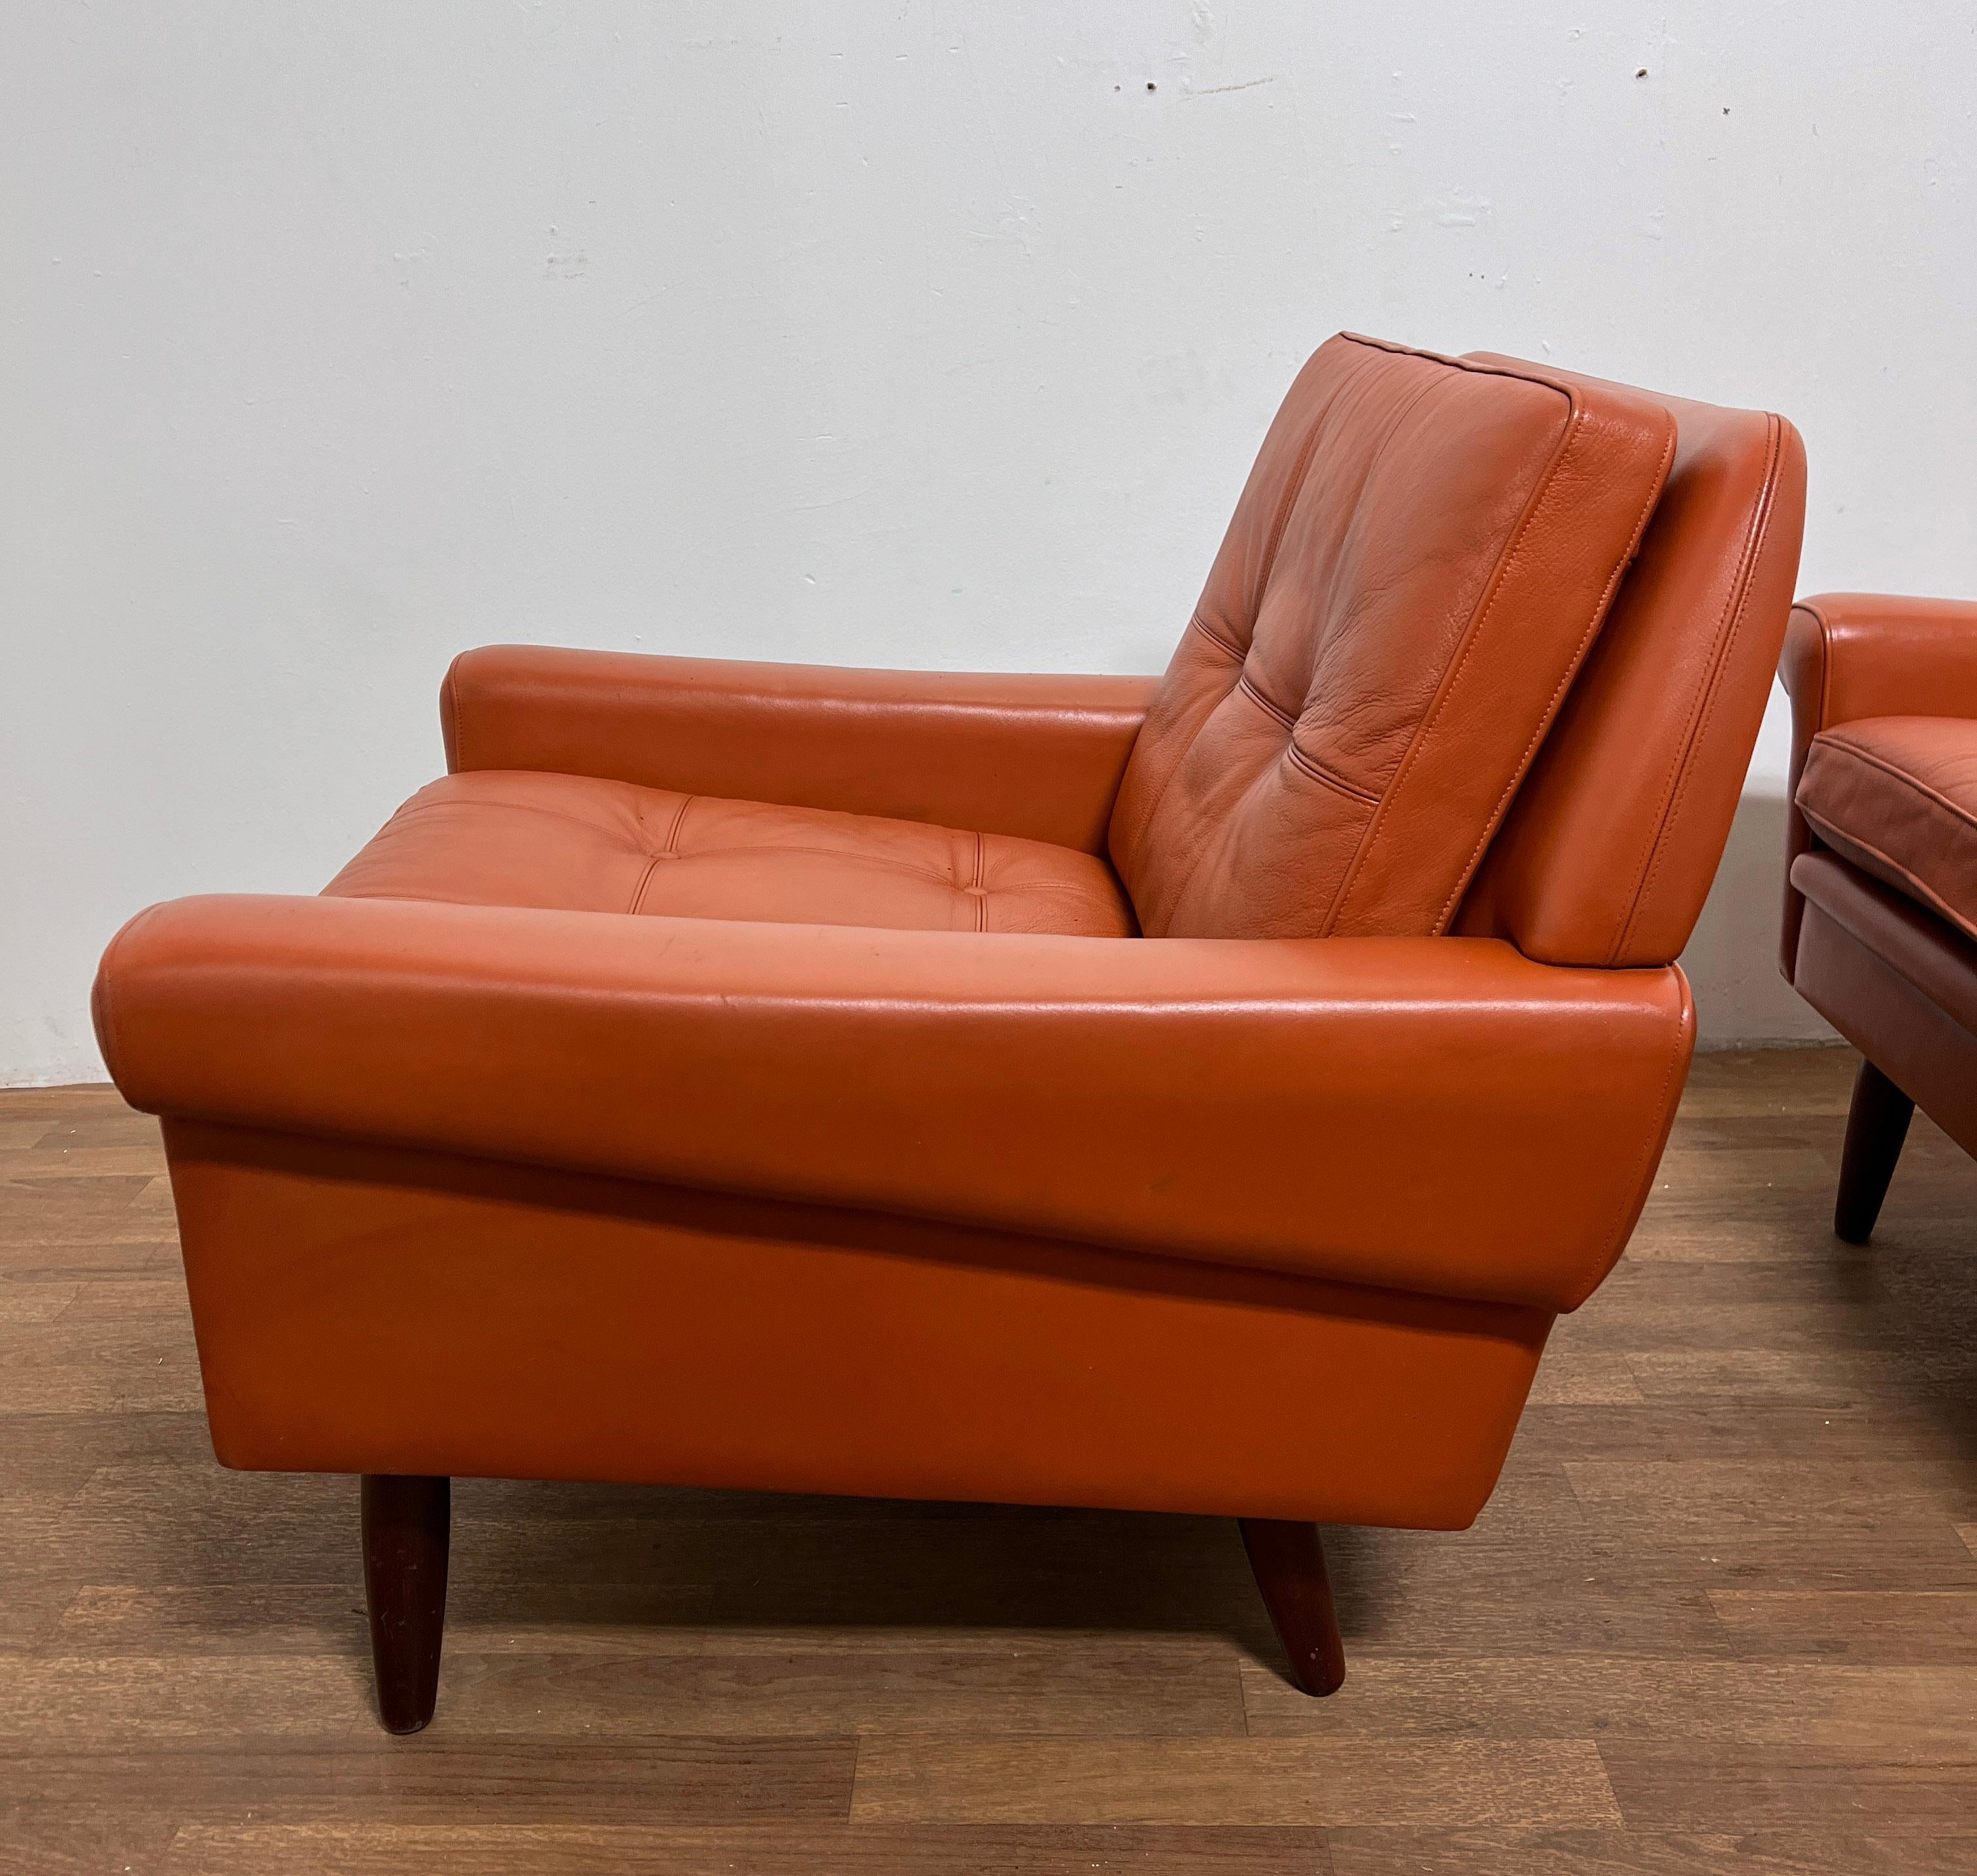 Pair of Danish Leather Lounge Chairs by Svend Skipper, Circa 1960s For Sale 1